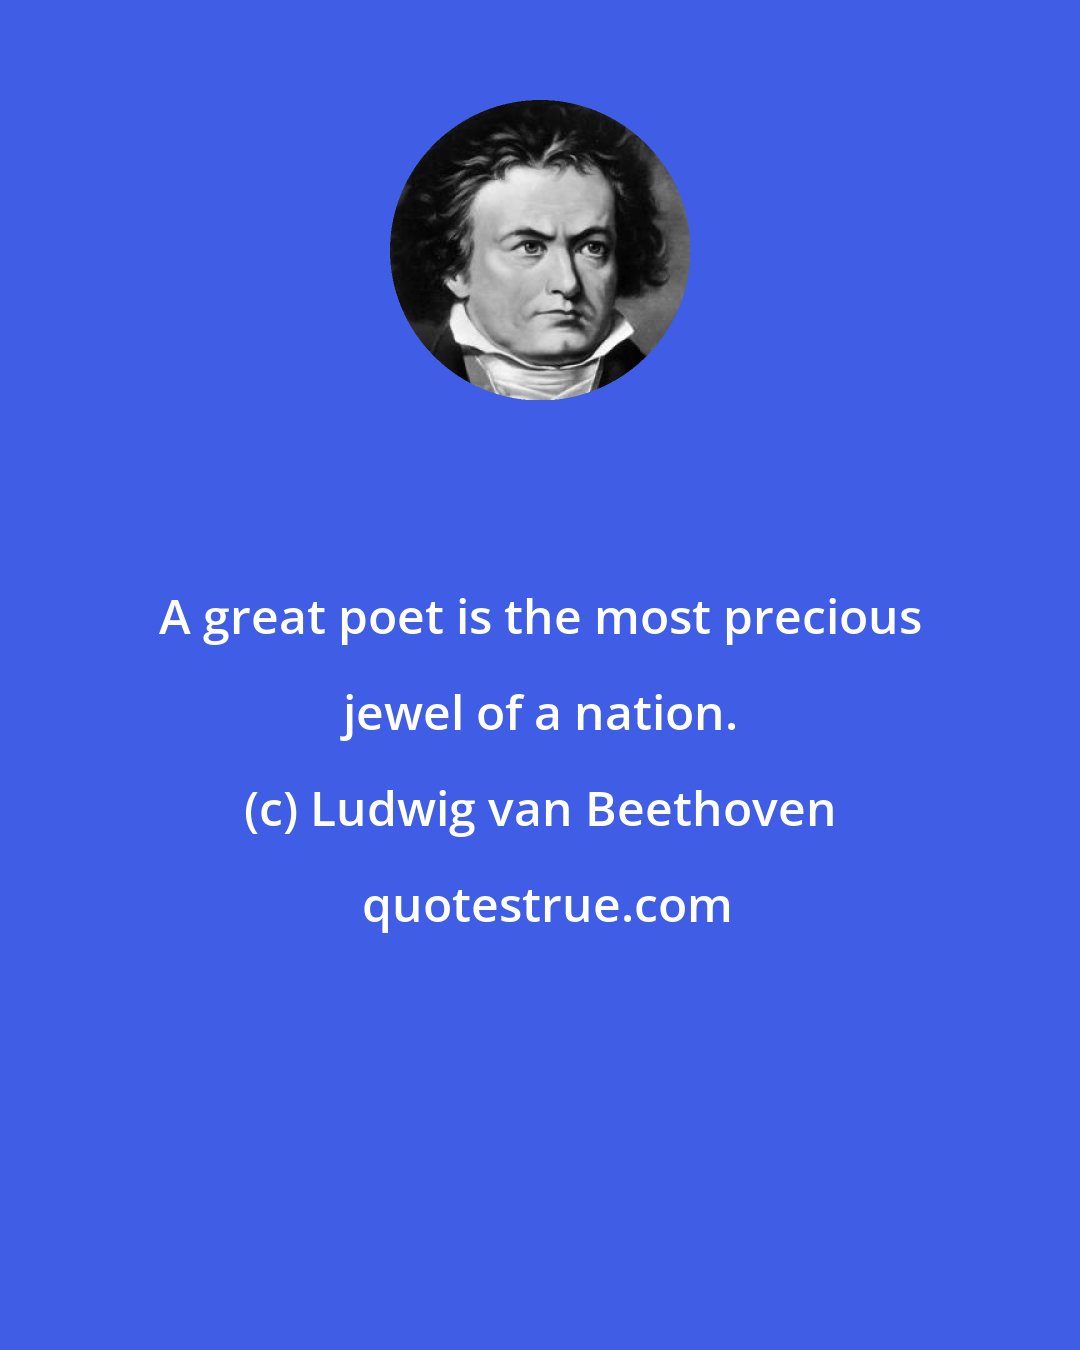 Ludwig van Beethoven: A great poet is the most precious jewel of a nation.